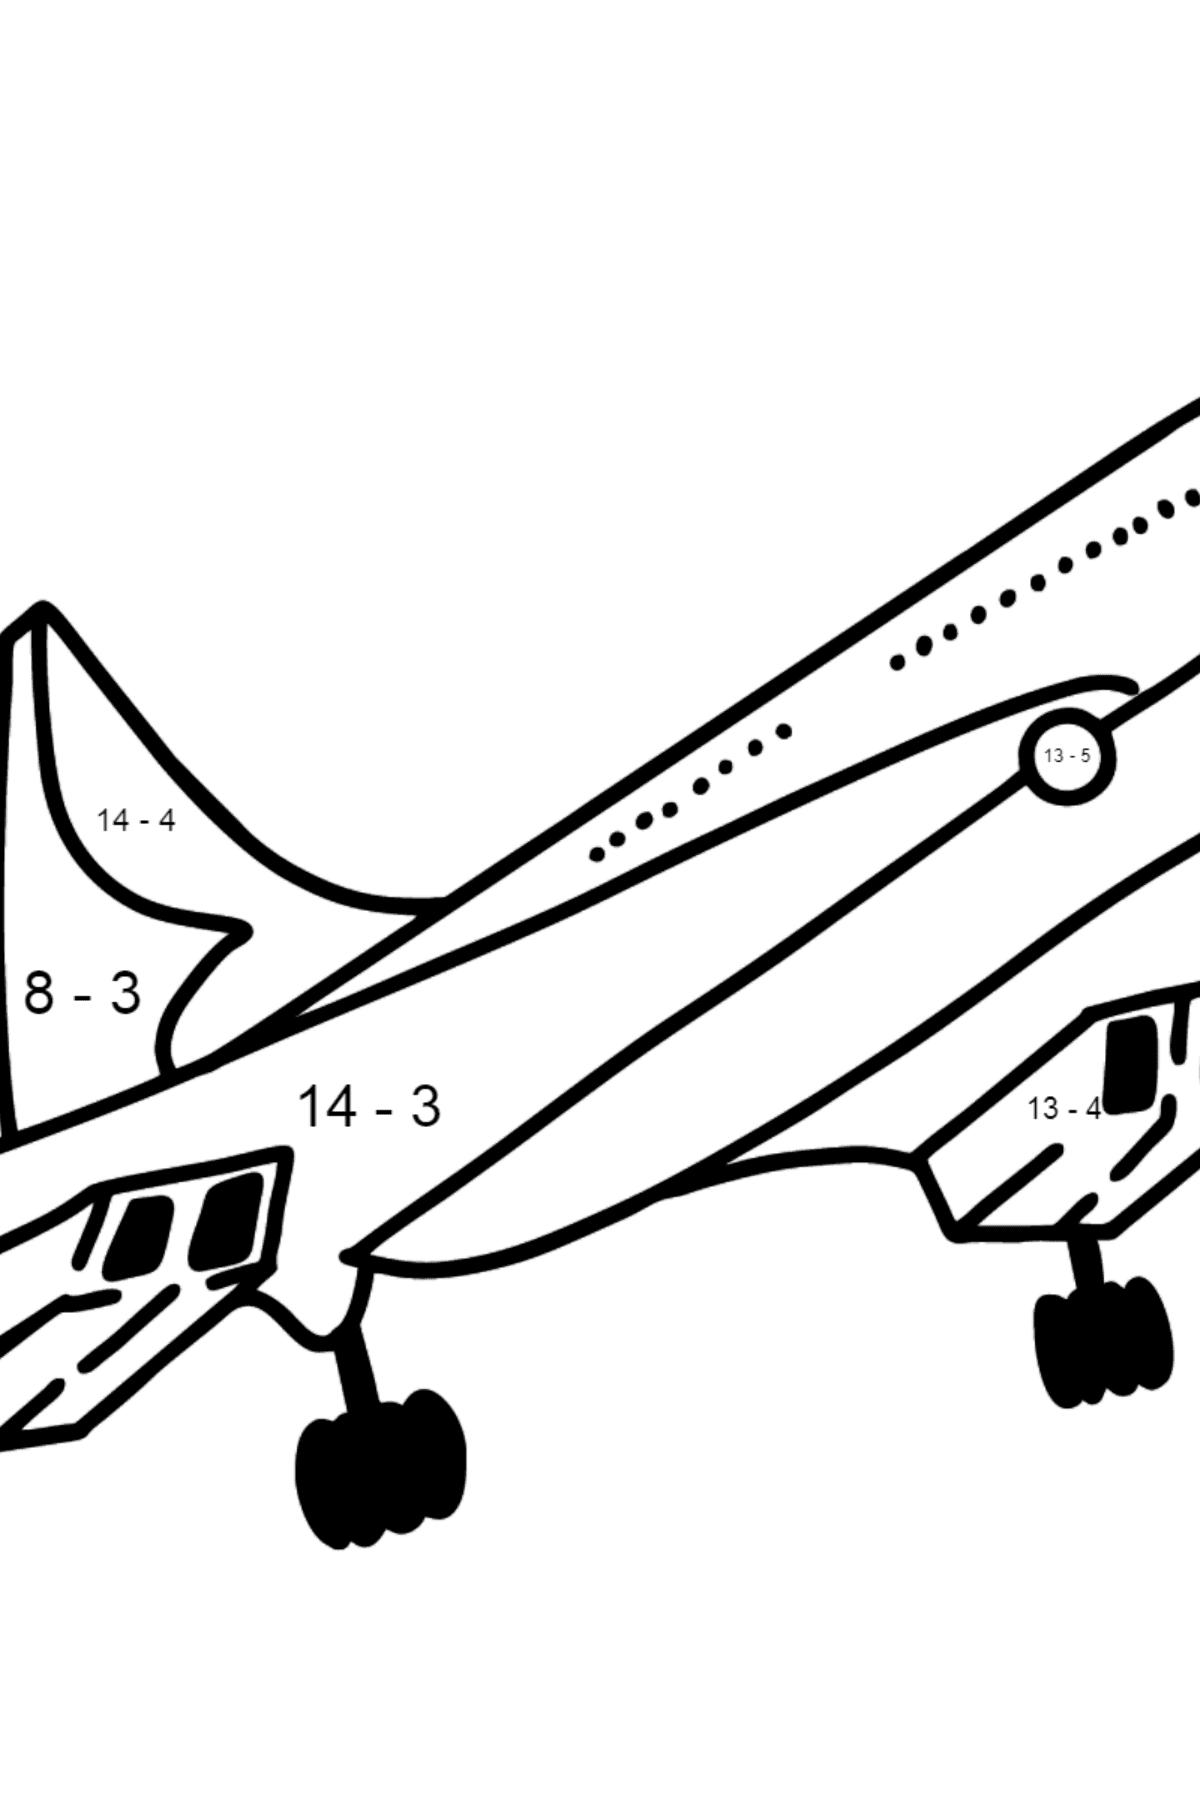 Concorde coloring page - Math Coloring - Subtraction for Kids